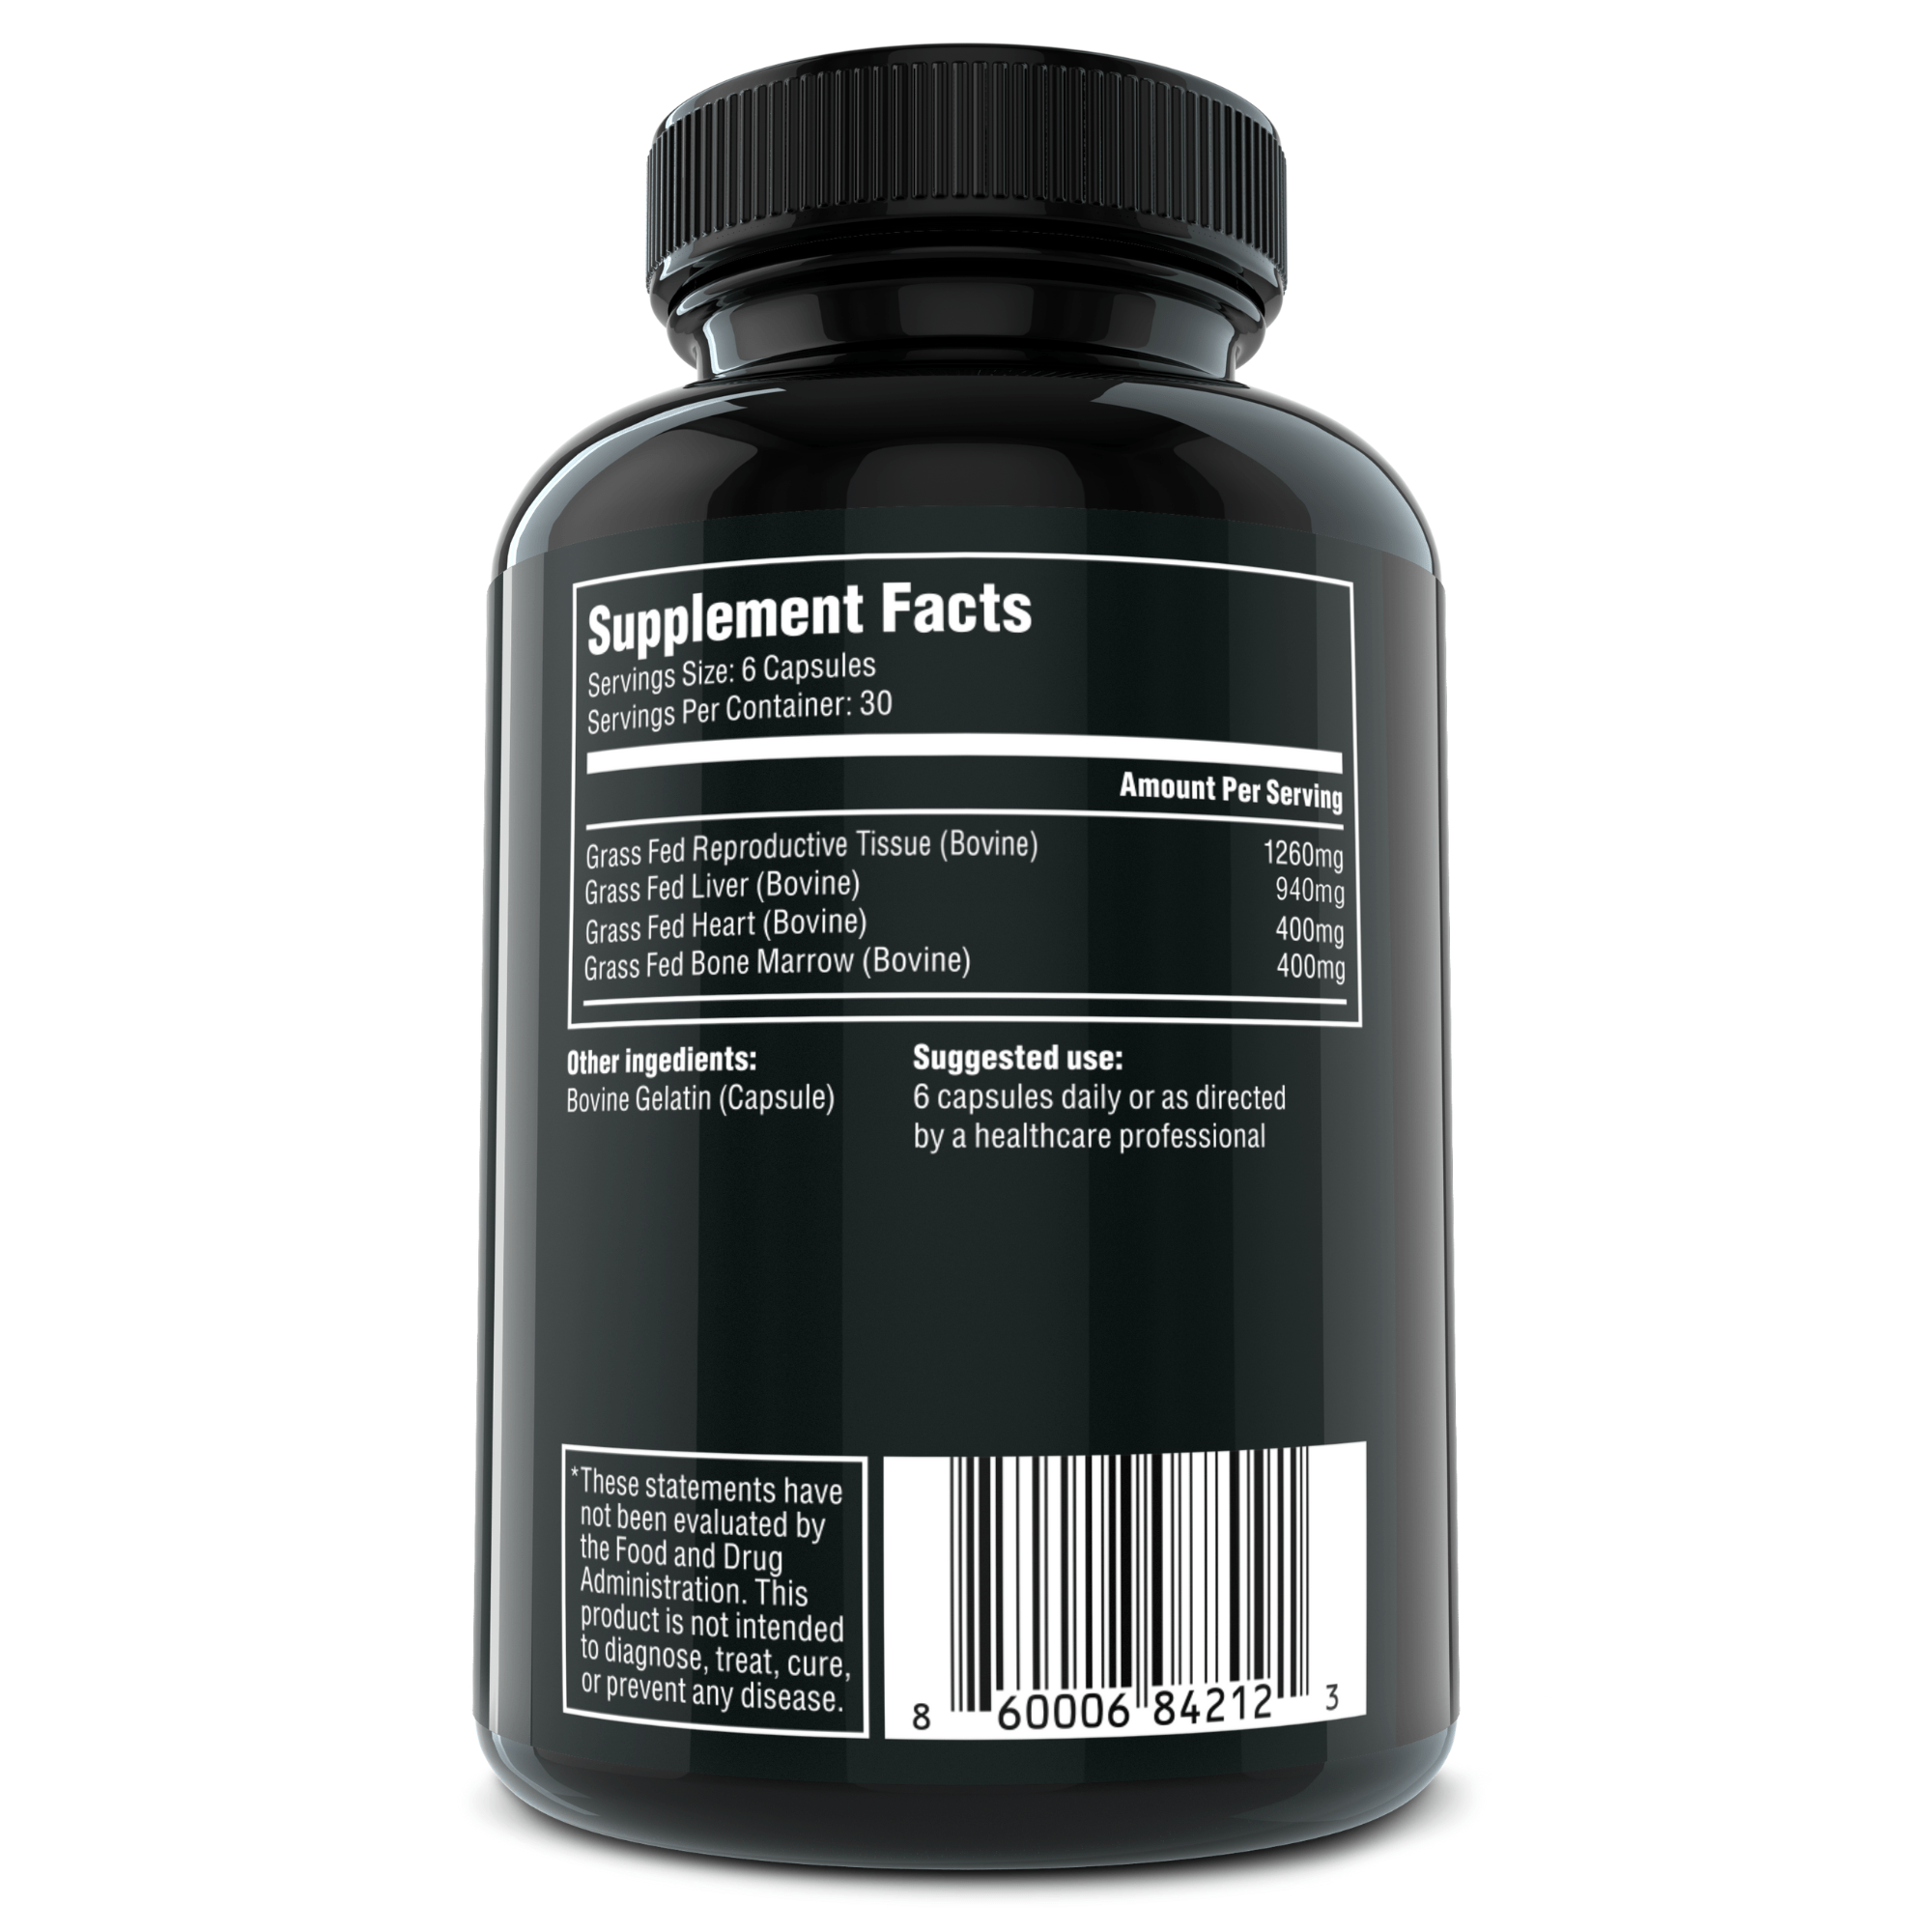 Rear of the Queen bottle clearly showing the supplements facts panel and ingredients bovine reproductive tissue, liver, heart, and bone marrow